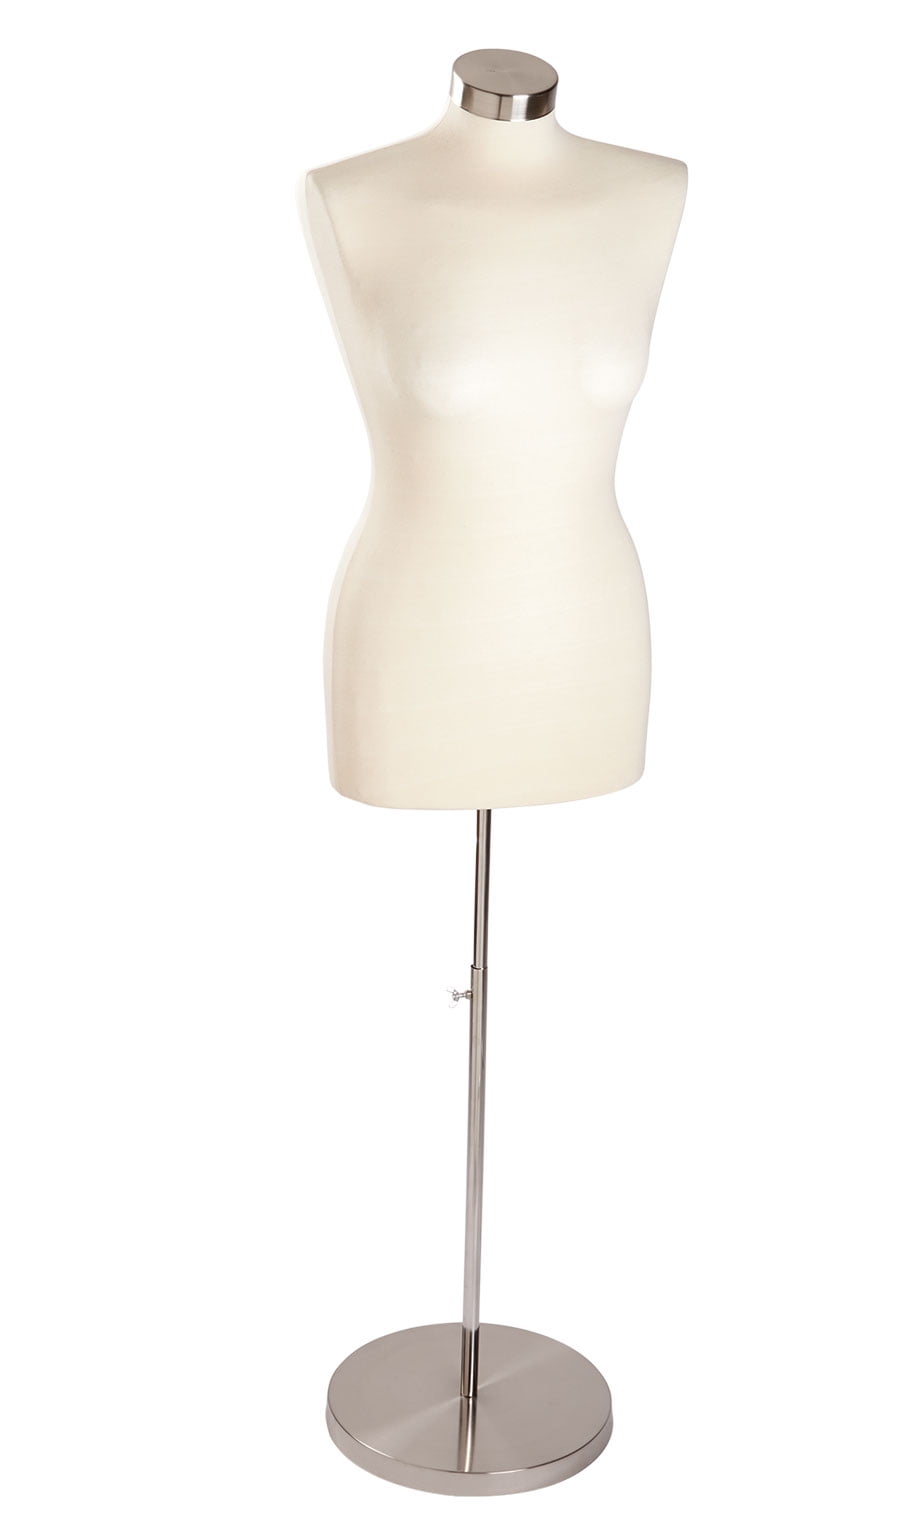 Adult Female Dress Form Mannequin Off White Pinnable Torso with Round Metal Base 